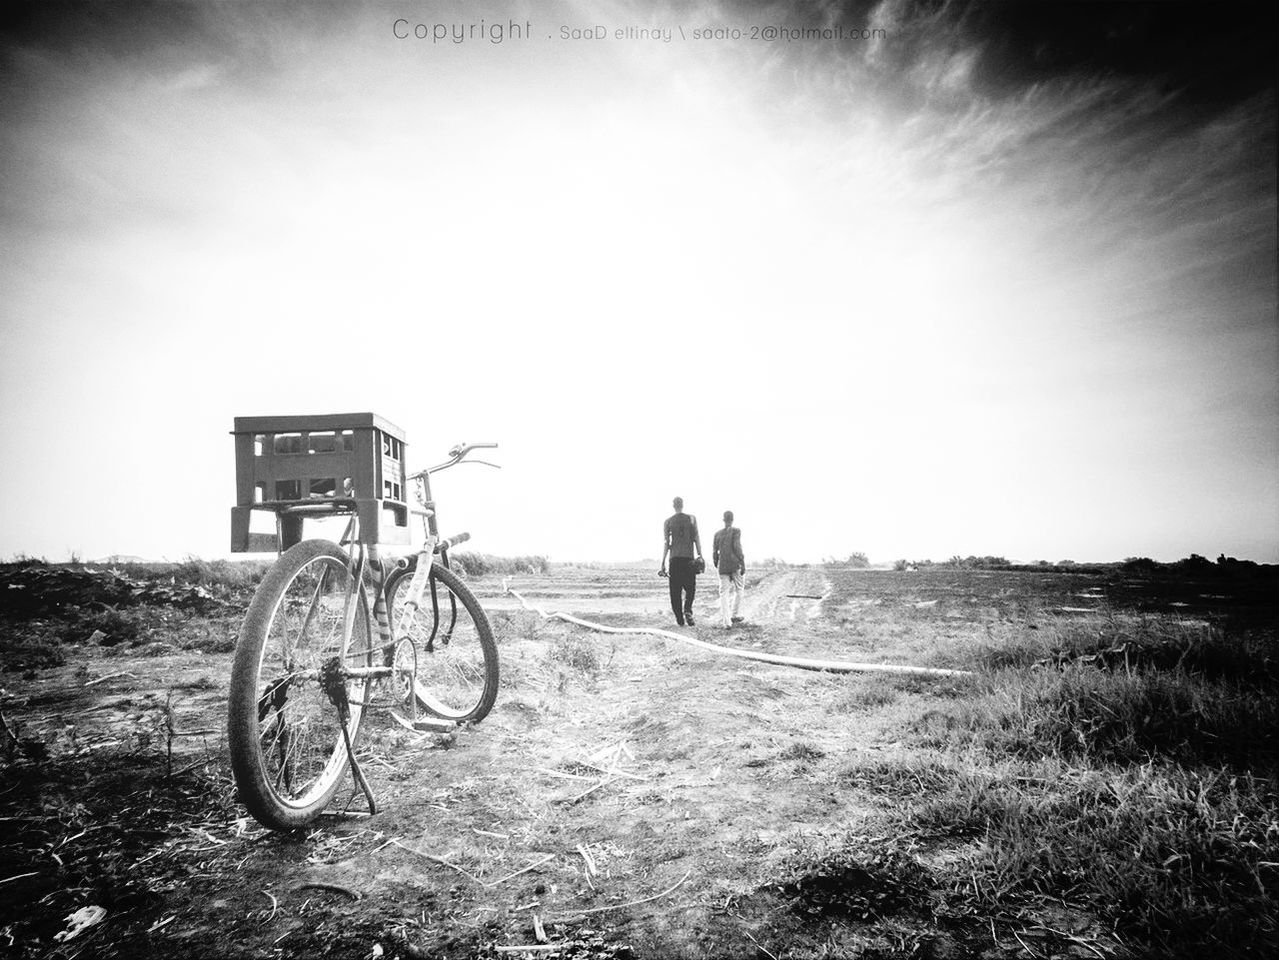 bicycle, transportation, land vehicle, mode of transport, lifestyles, men, field, sky, leisure activity, landscape, full length, grass, riding, dirt road, day, outdoors, road, stationary